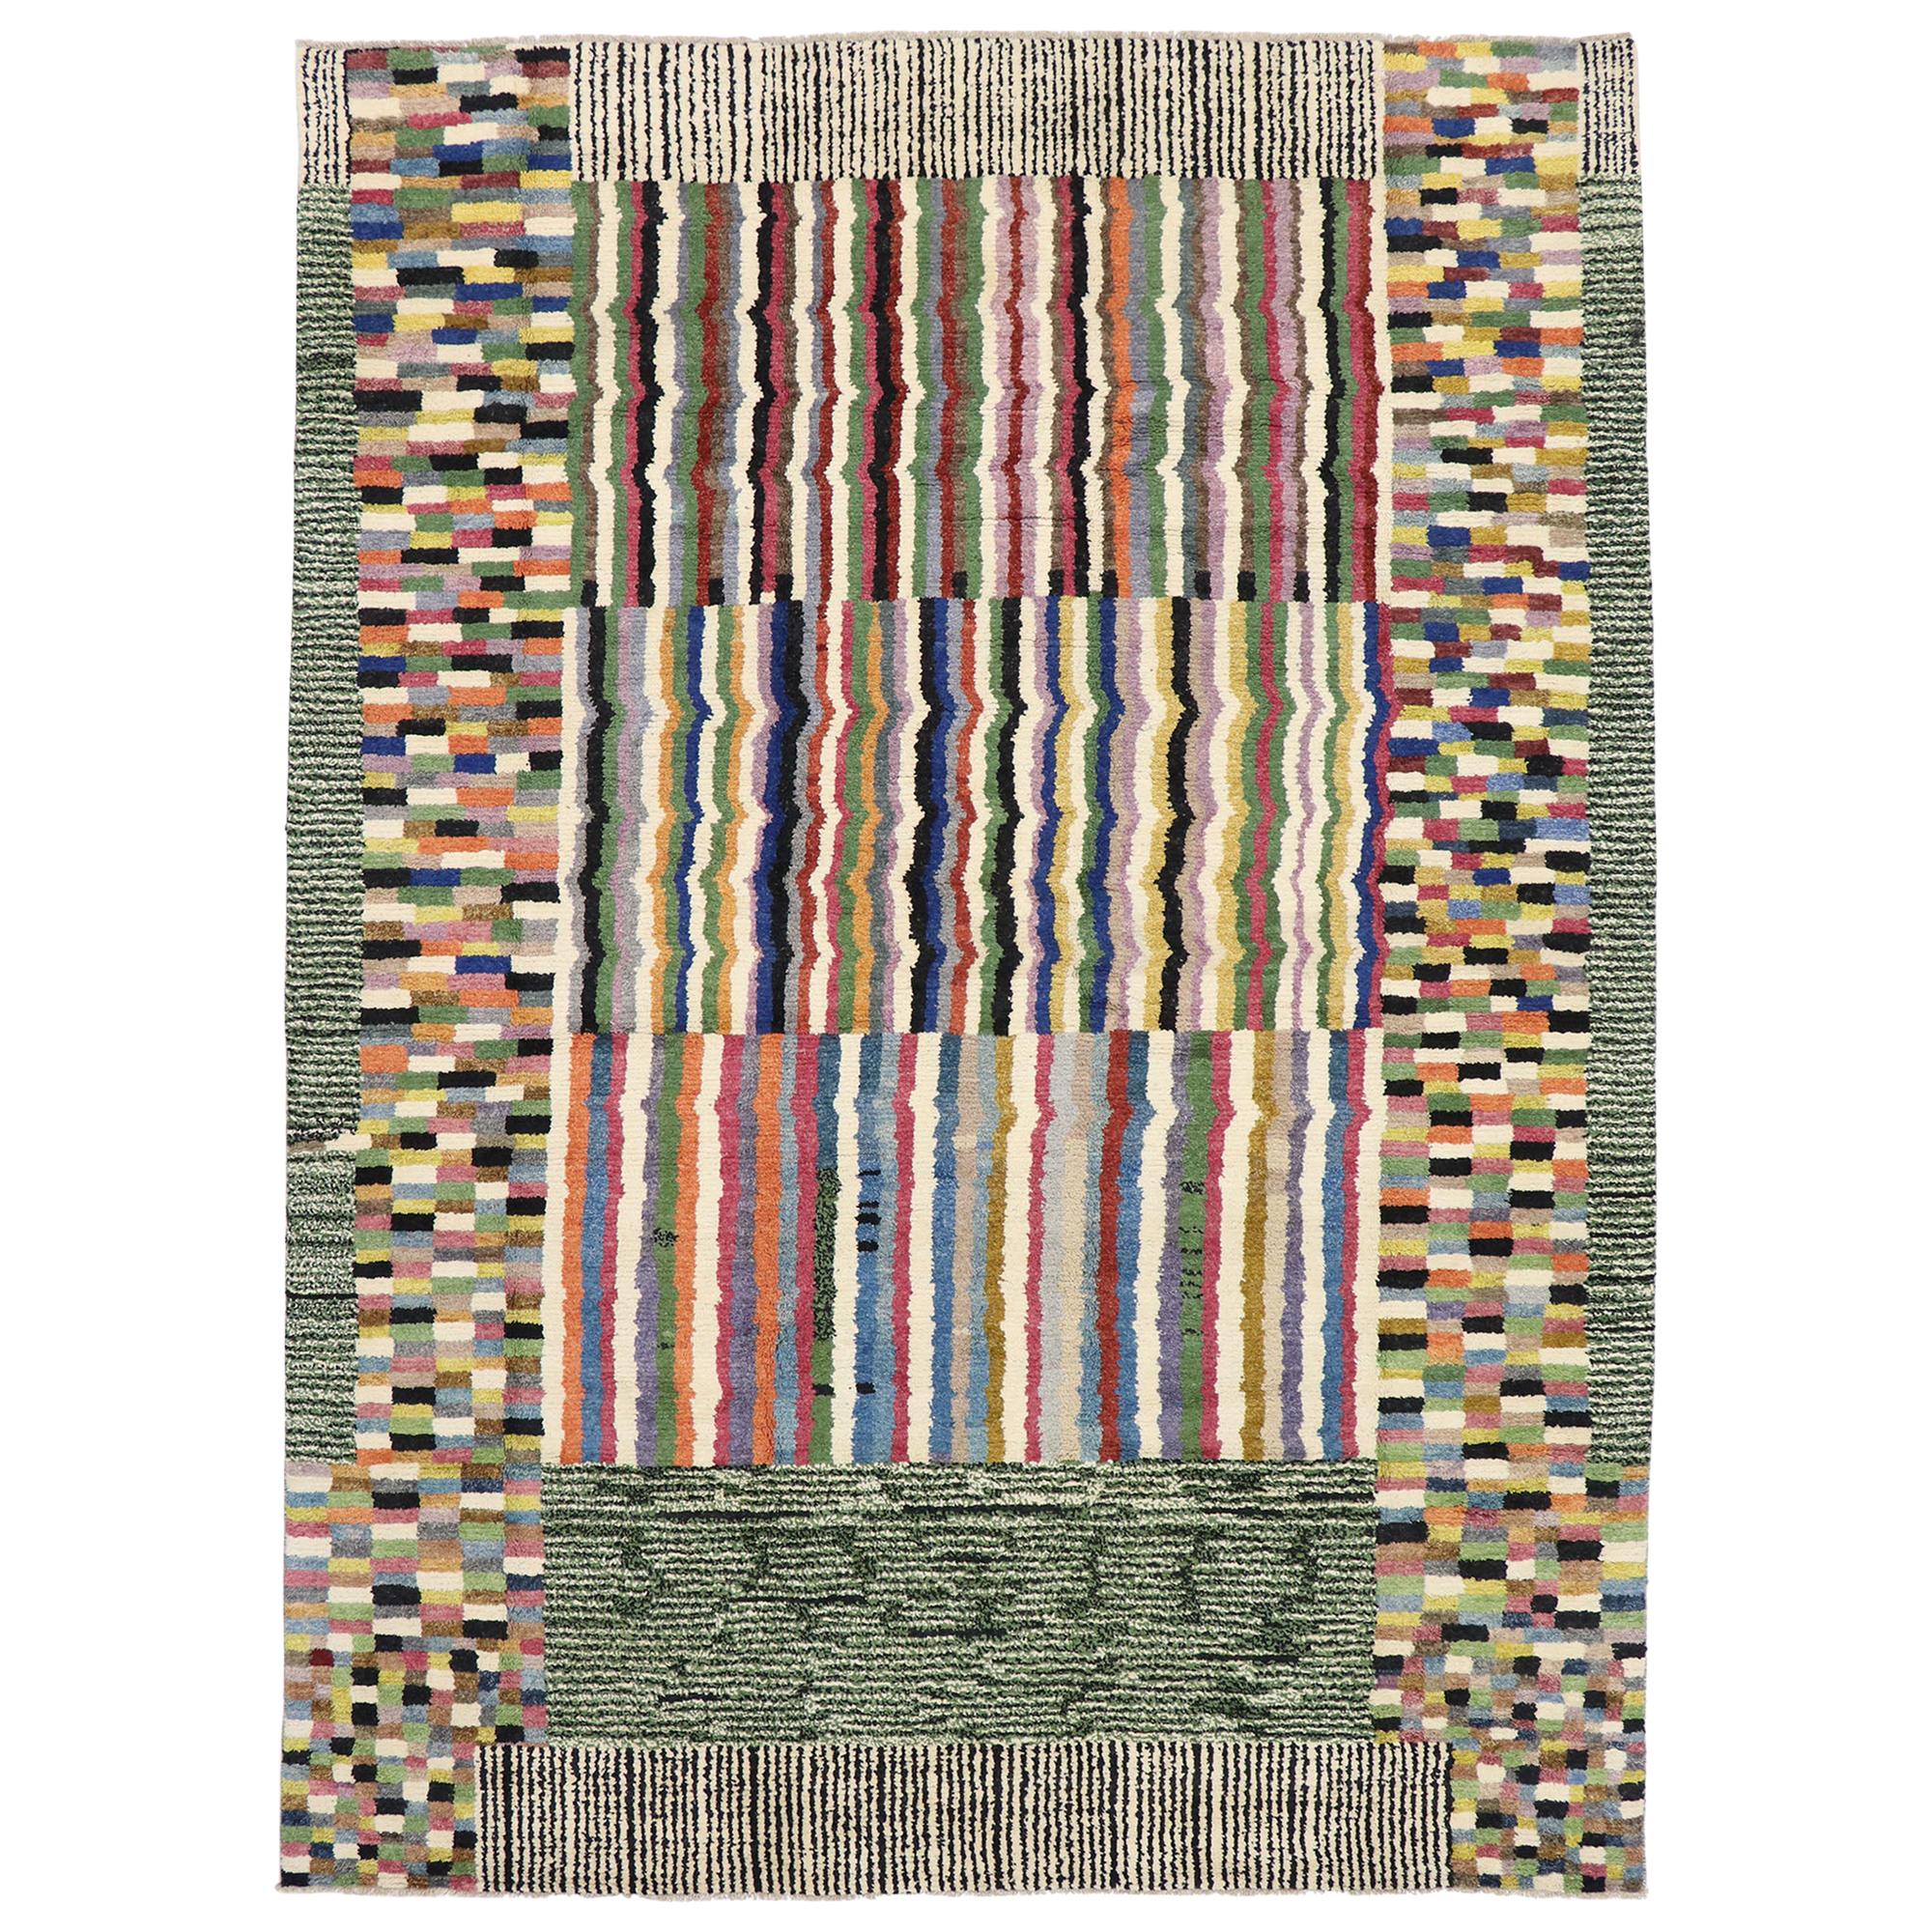 New Contemporary Moroccan Rug Inspired by Ettore Sottsass with Postmodern Style